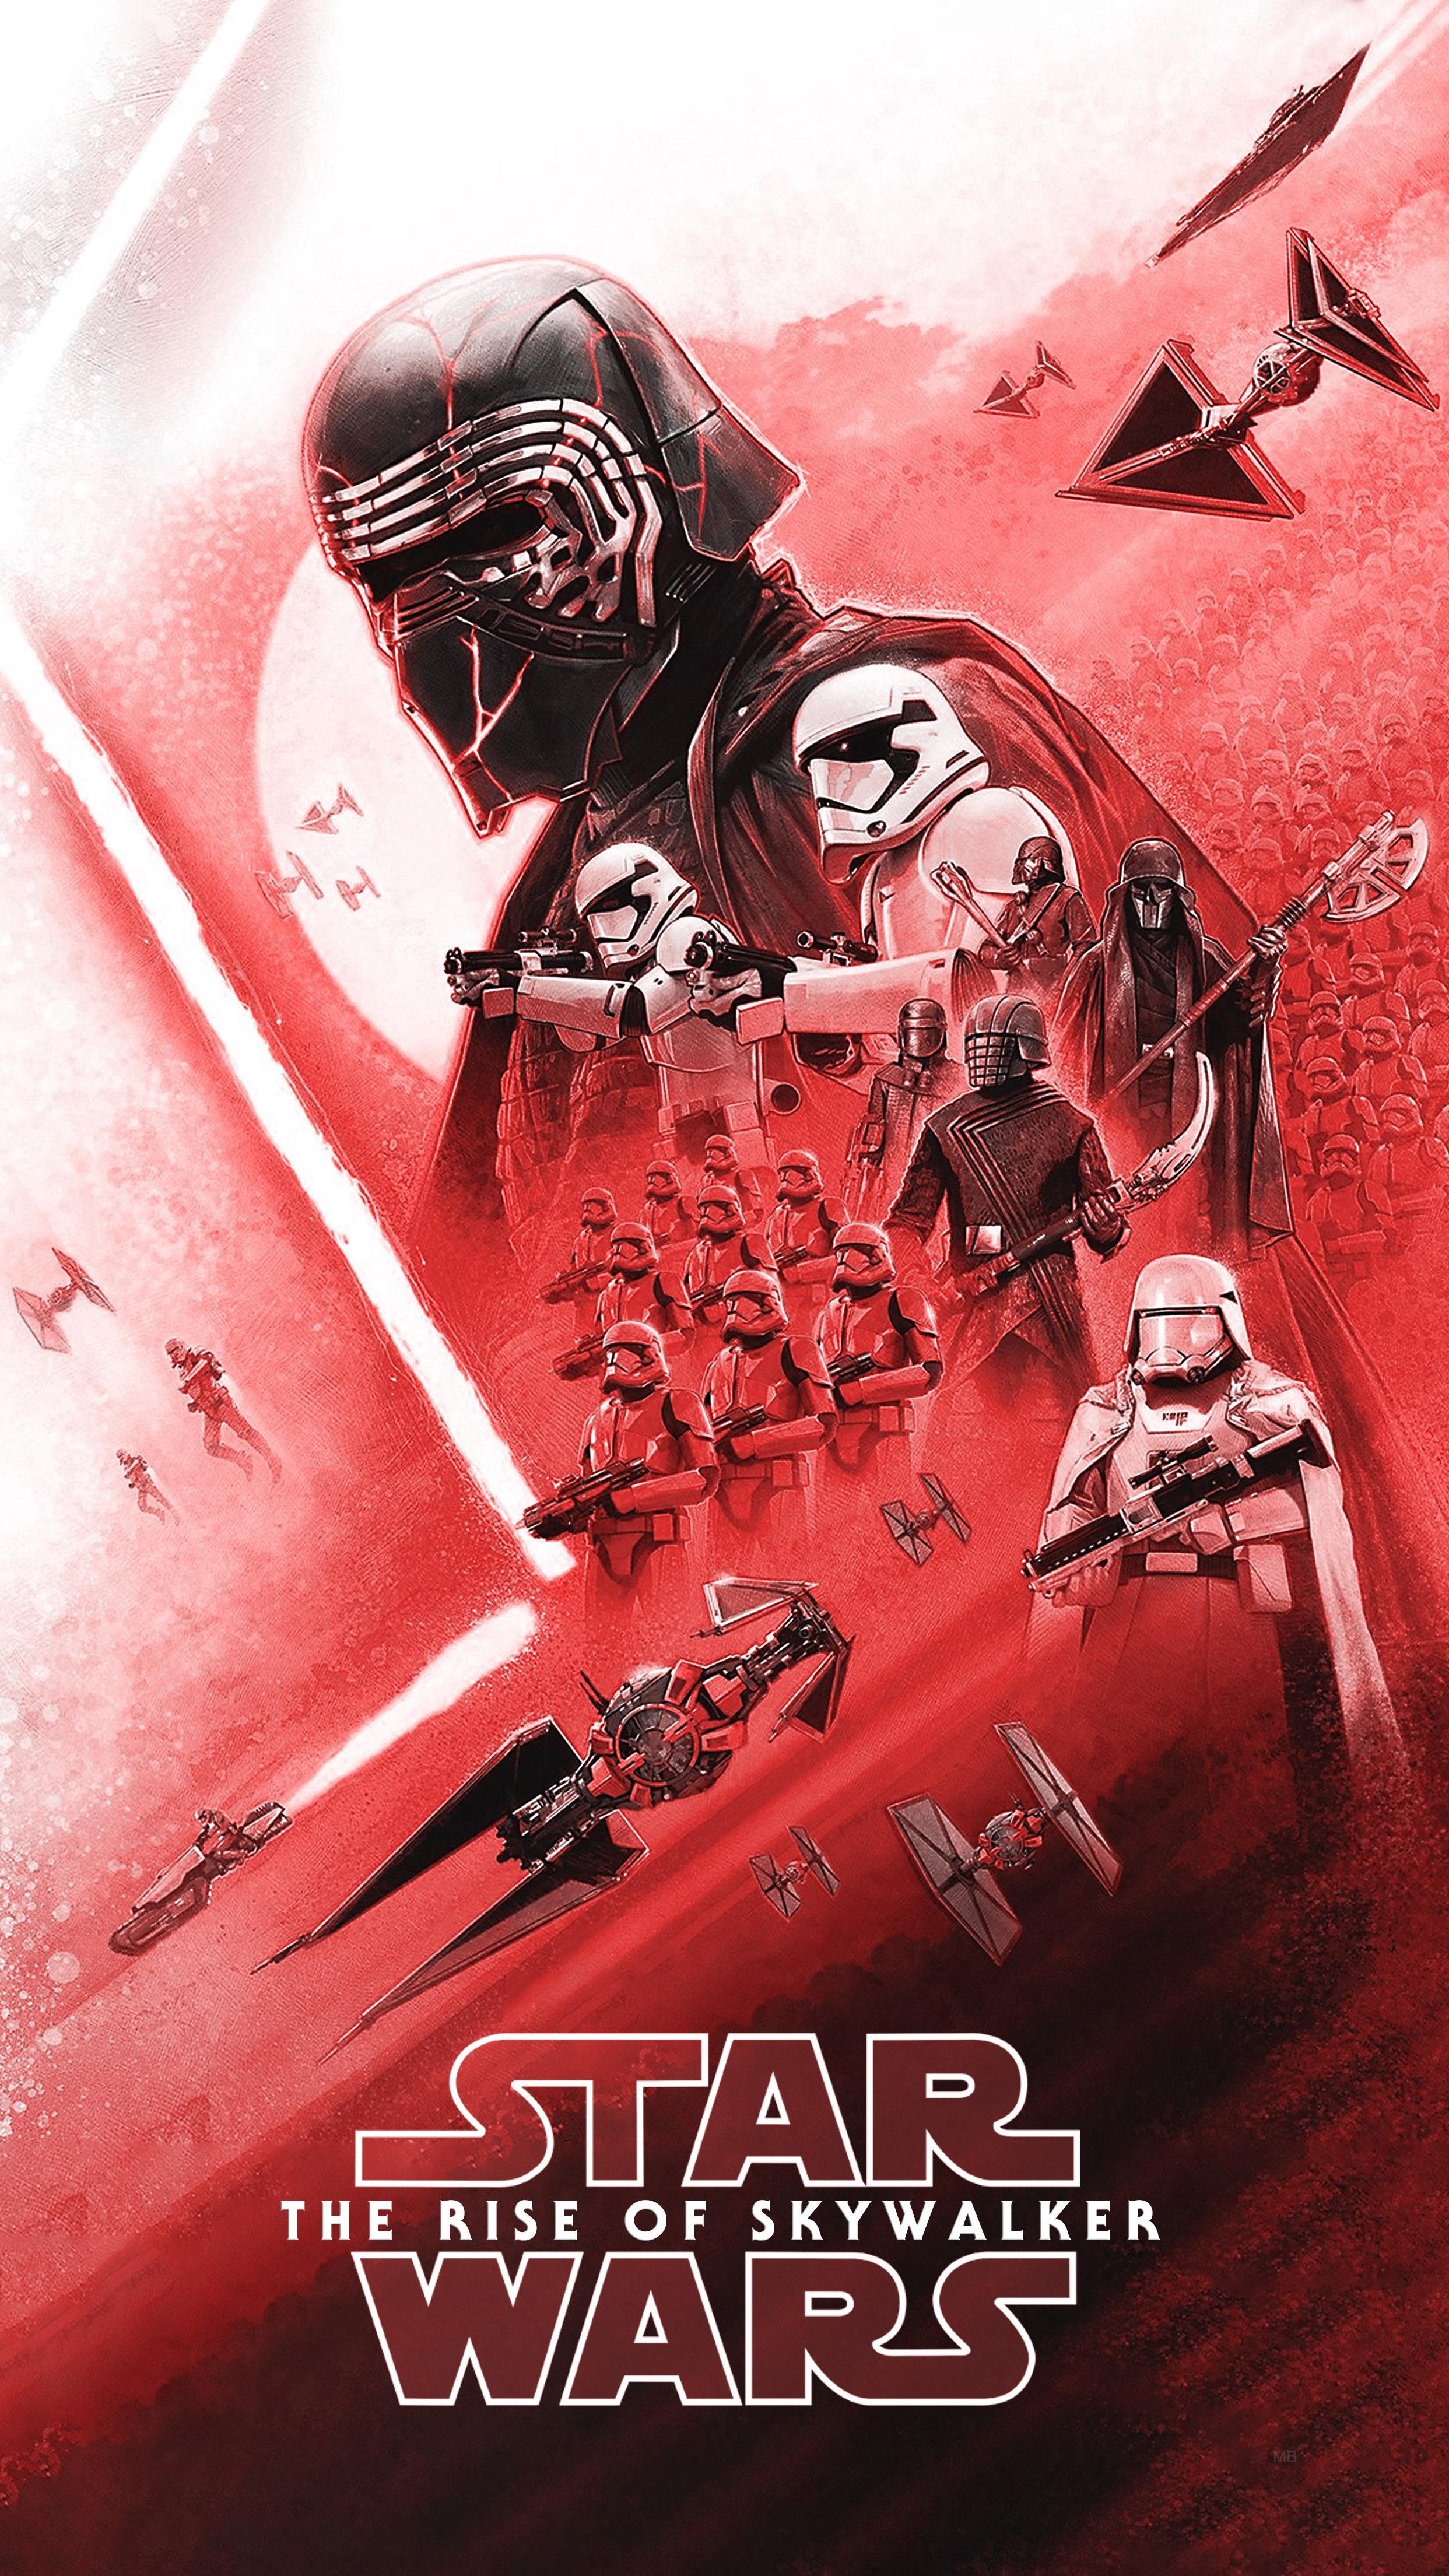 Star Wars Sith Wallpaper Factory Sale, 54% OFF